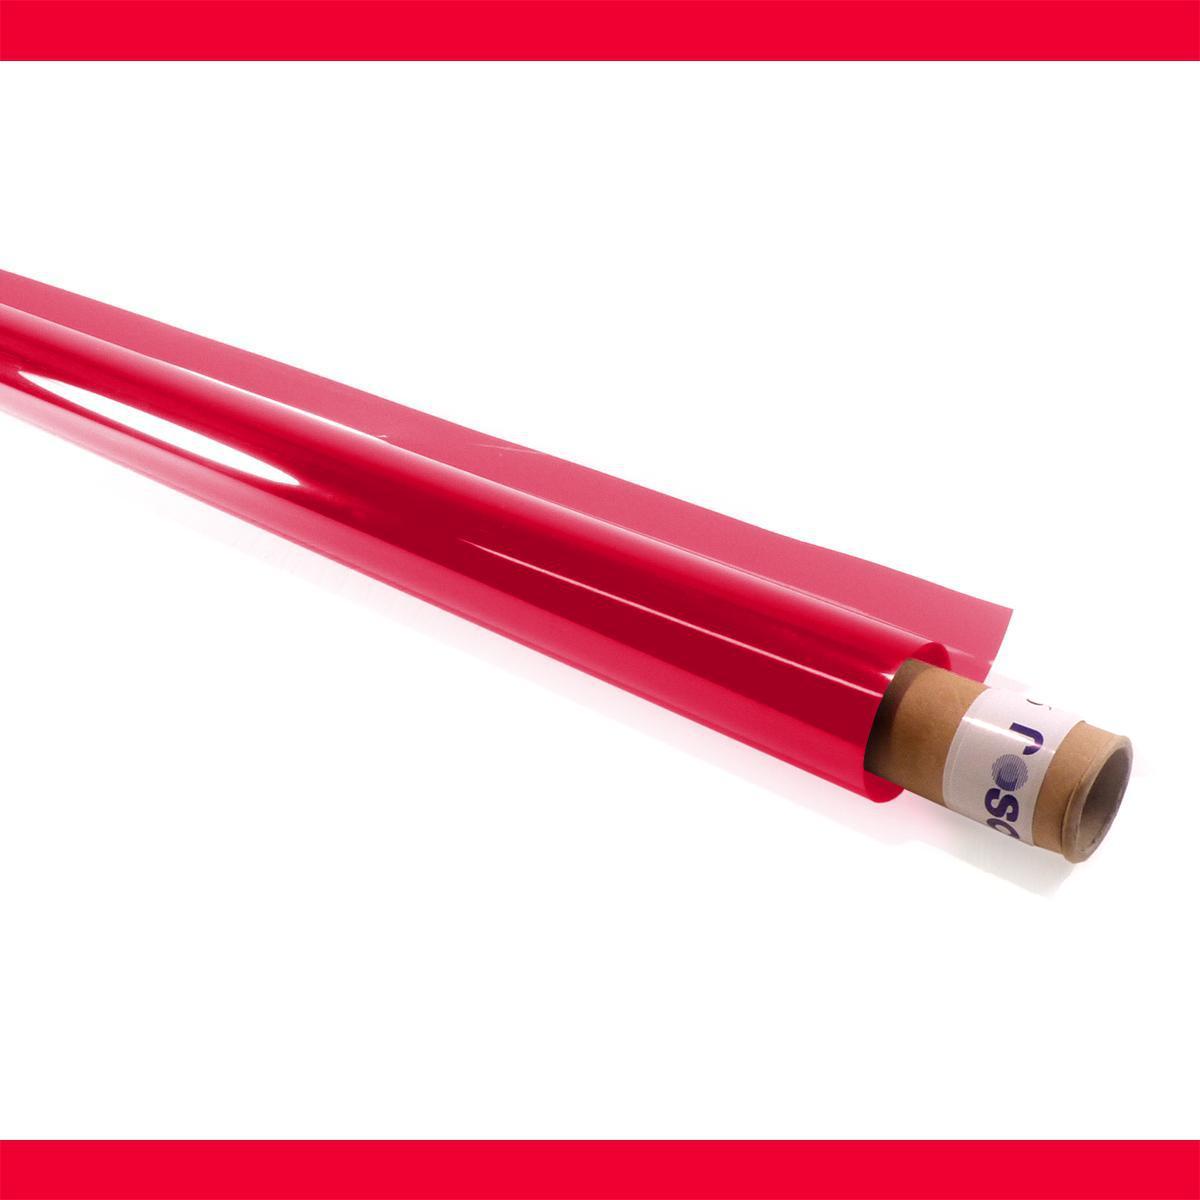 An image of 106 Primary Red Lighting Gel Roll